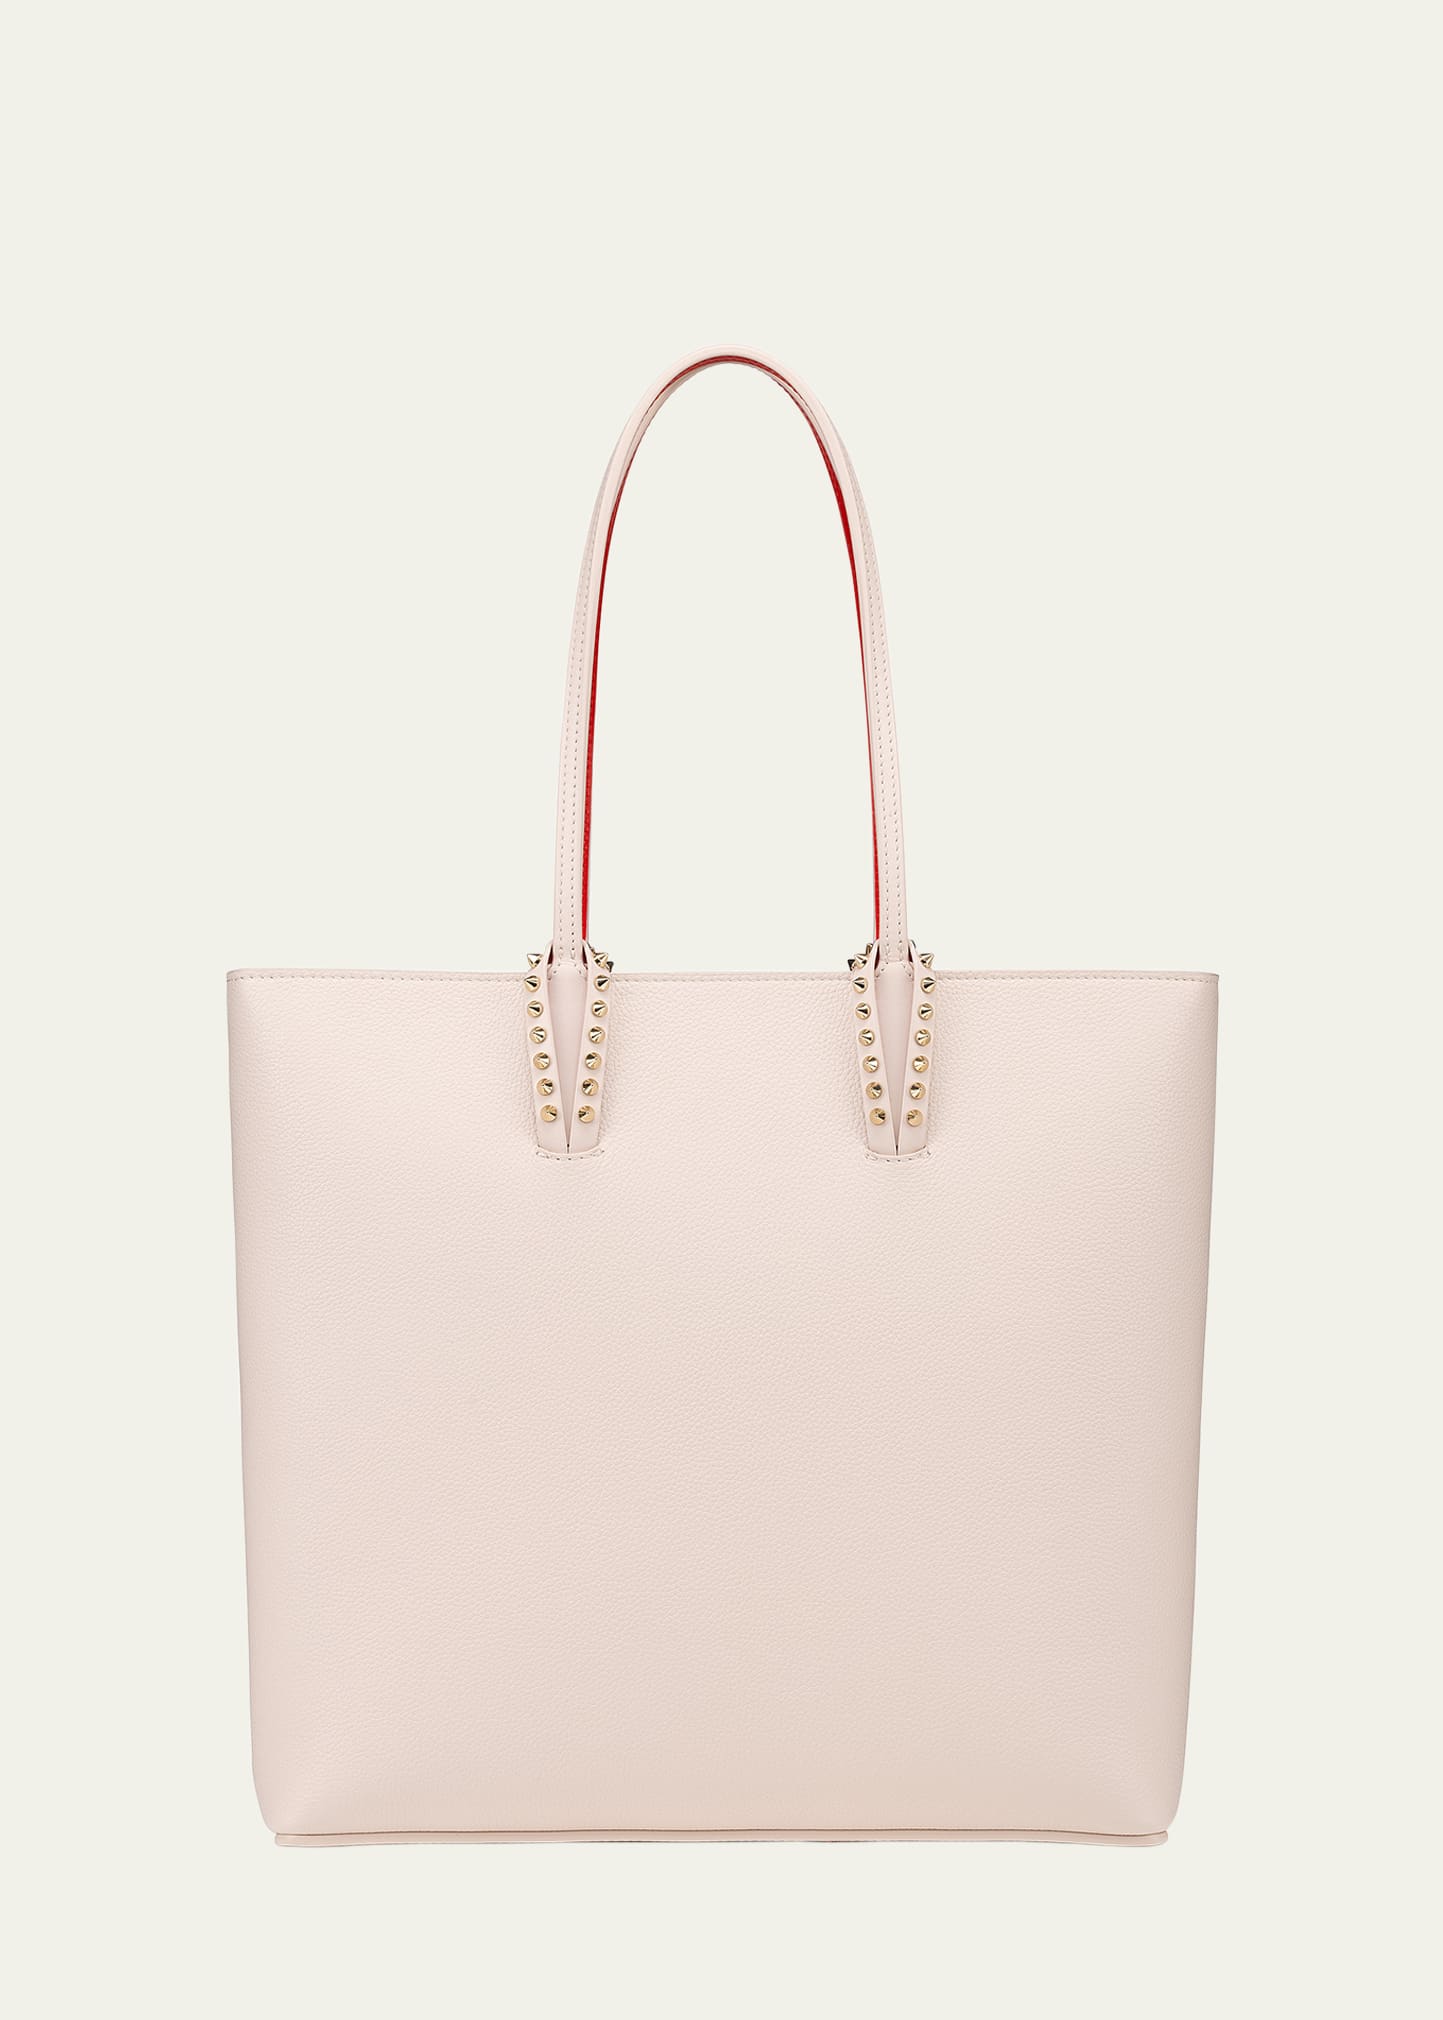 Cabata Zipped NS Tote in Leather